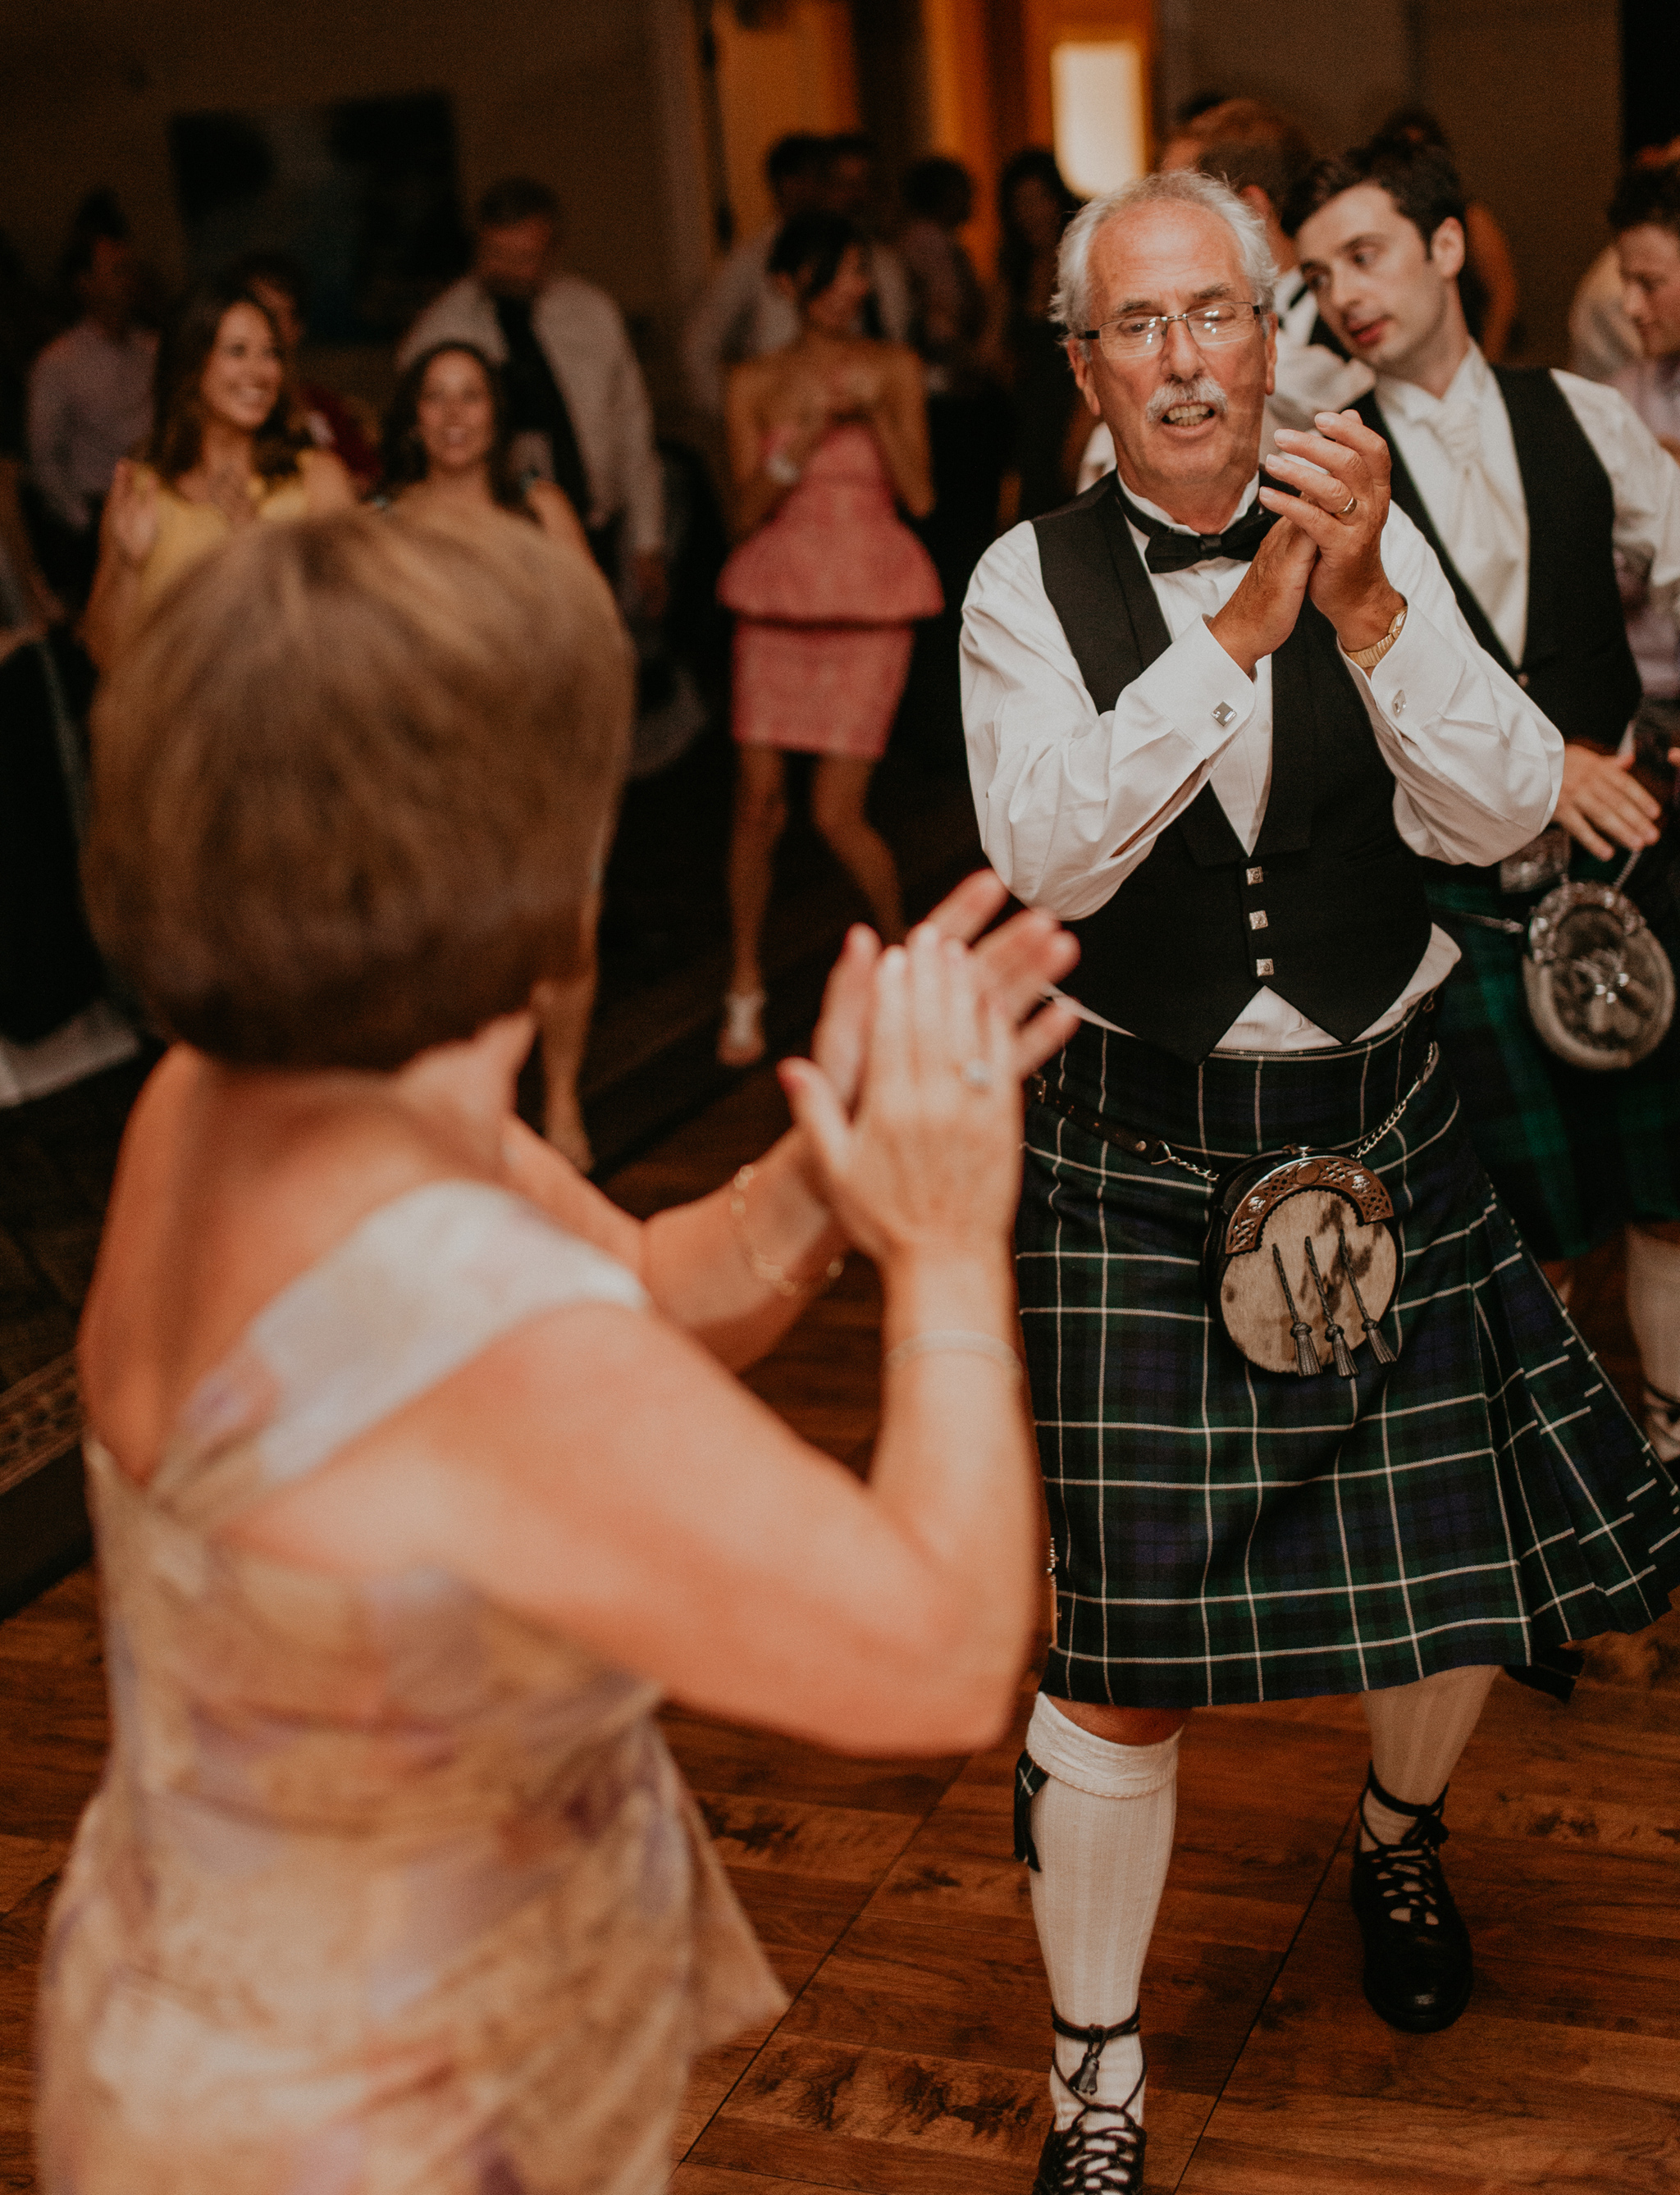 Father of the groom dances in kilt at wedding reception